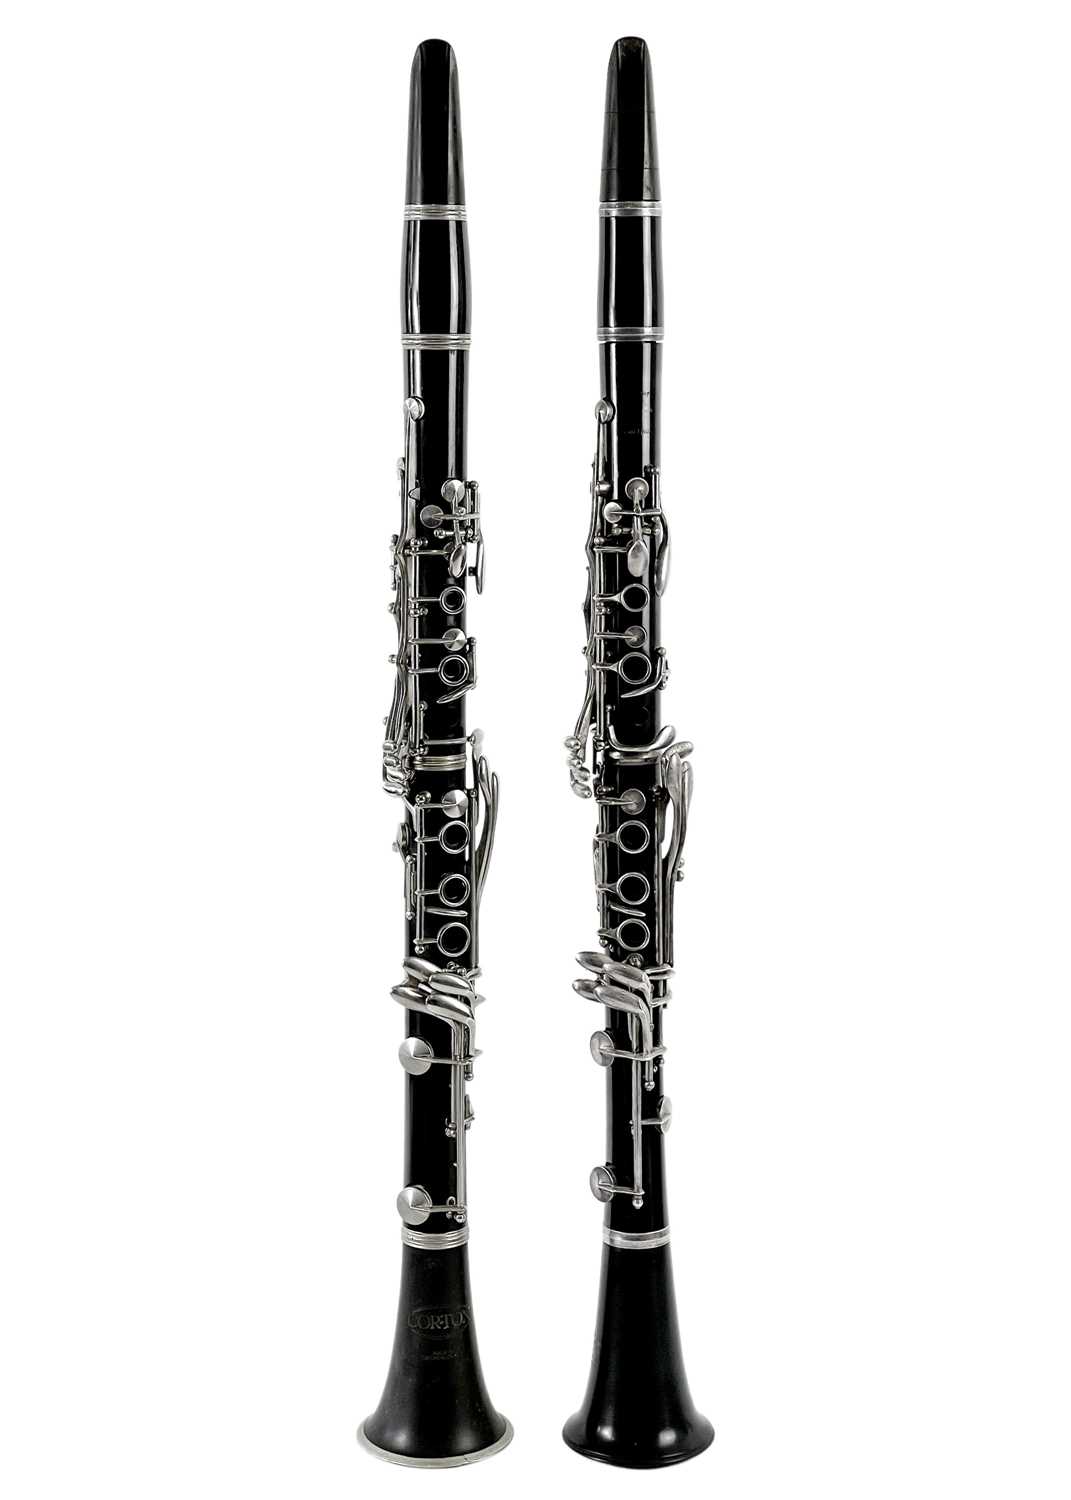 Two clarinets; Boosey & Hawkes and Corton.